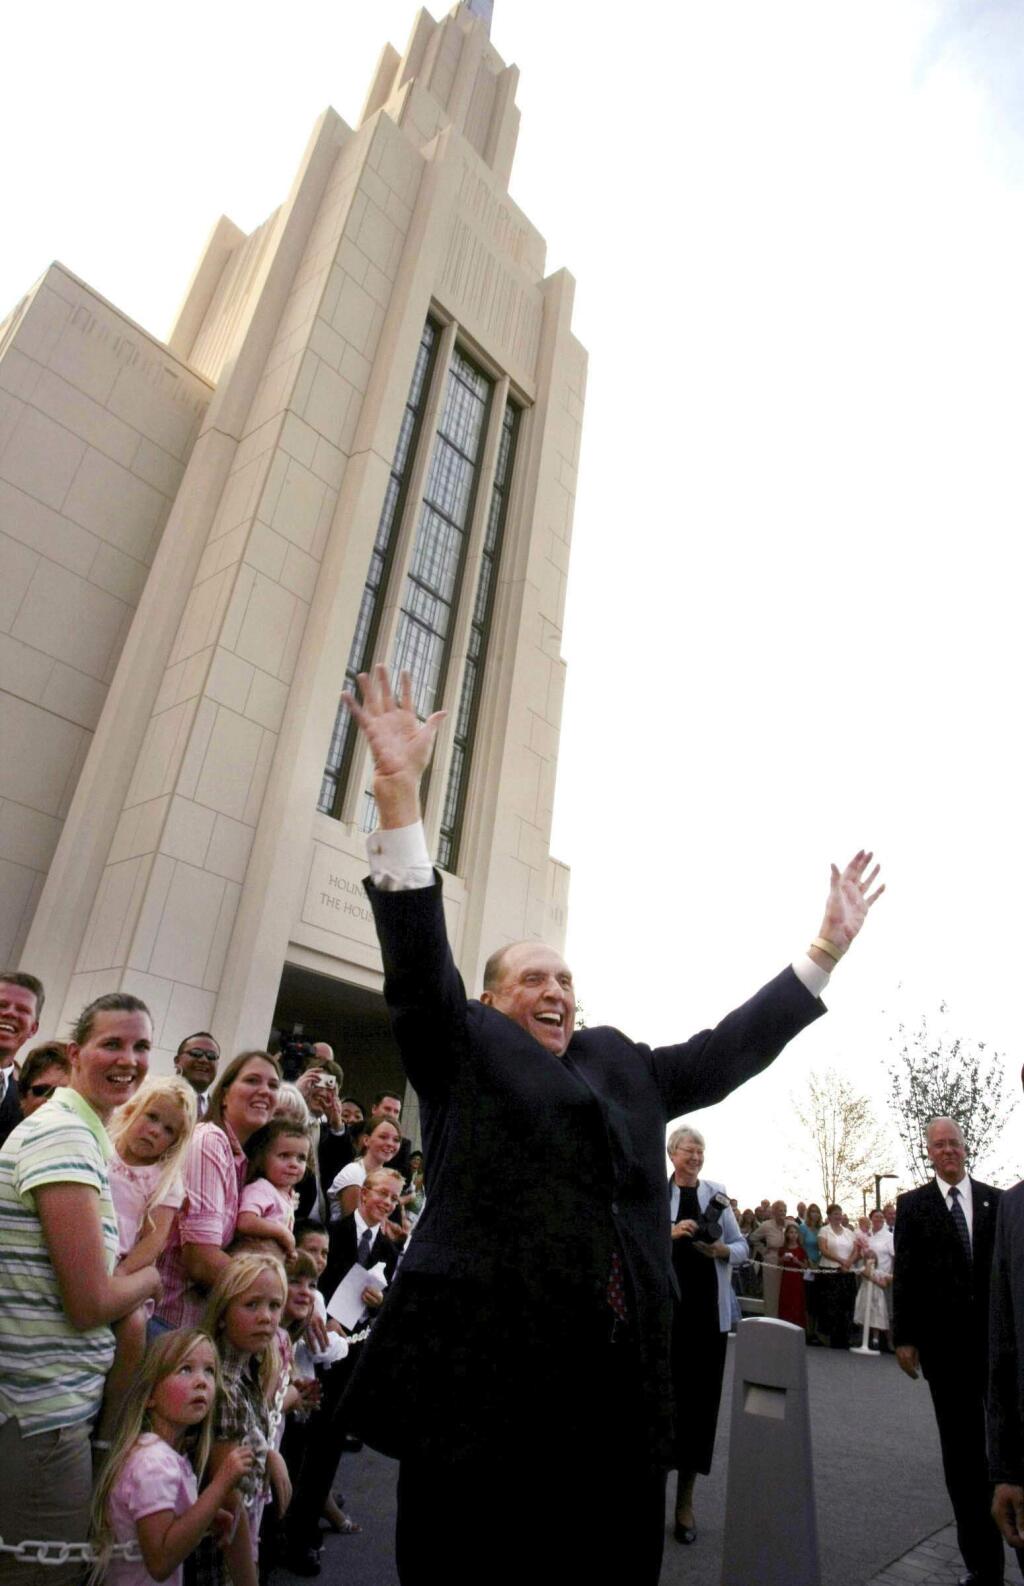 In this Aug. 24, 2008 photo, President Thomas S. Monson waves as he is leaving Twin Falls Temple in Twin Falls, Idaho. Aug. 24, 2008. Monson, the 16th president of the Mormon church, died Tuesday, Jan. 2, 2018, after overseeing the religion for nearly a decade. He was 90. (Scott G. Winterton/The Deseret News via AP)